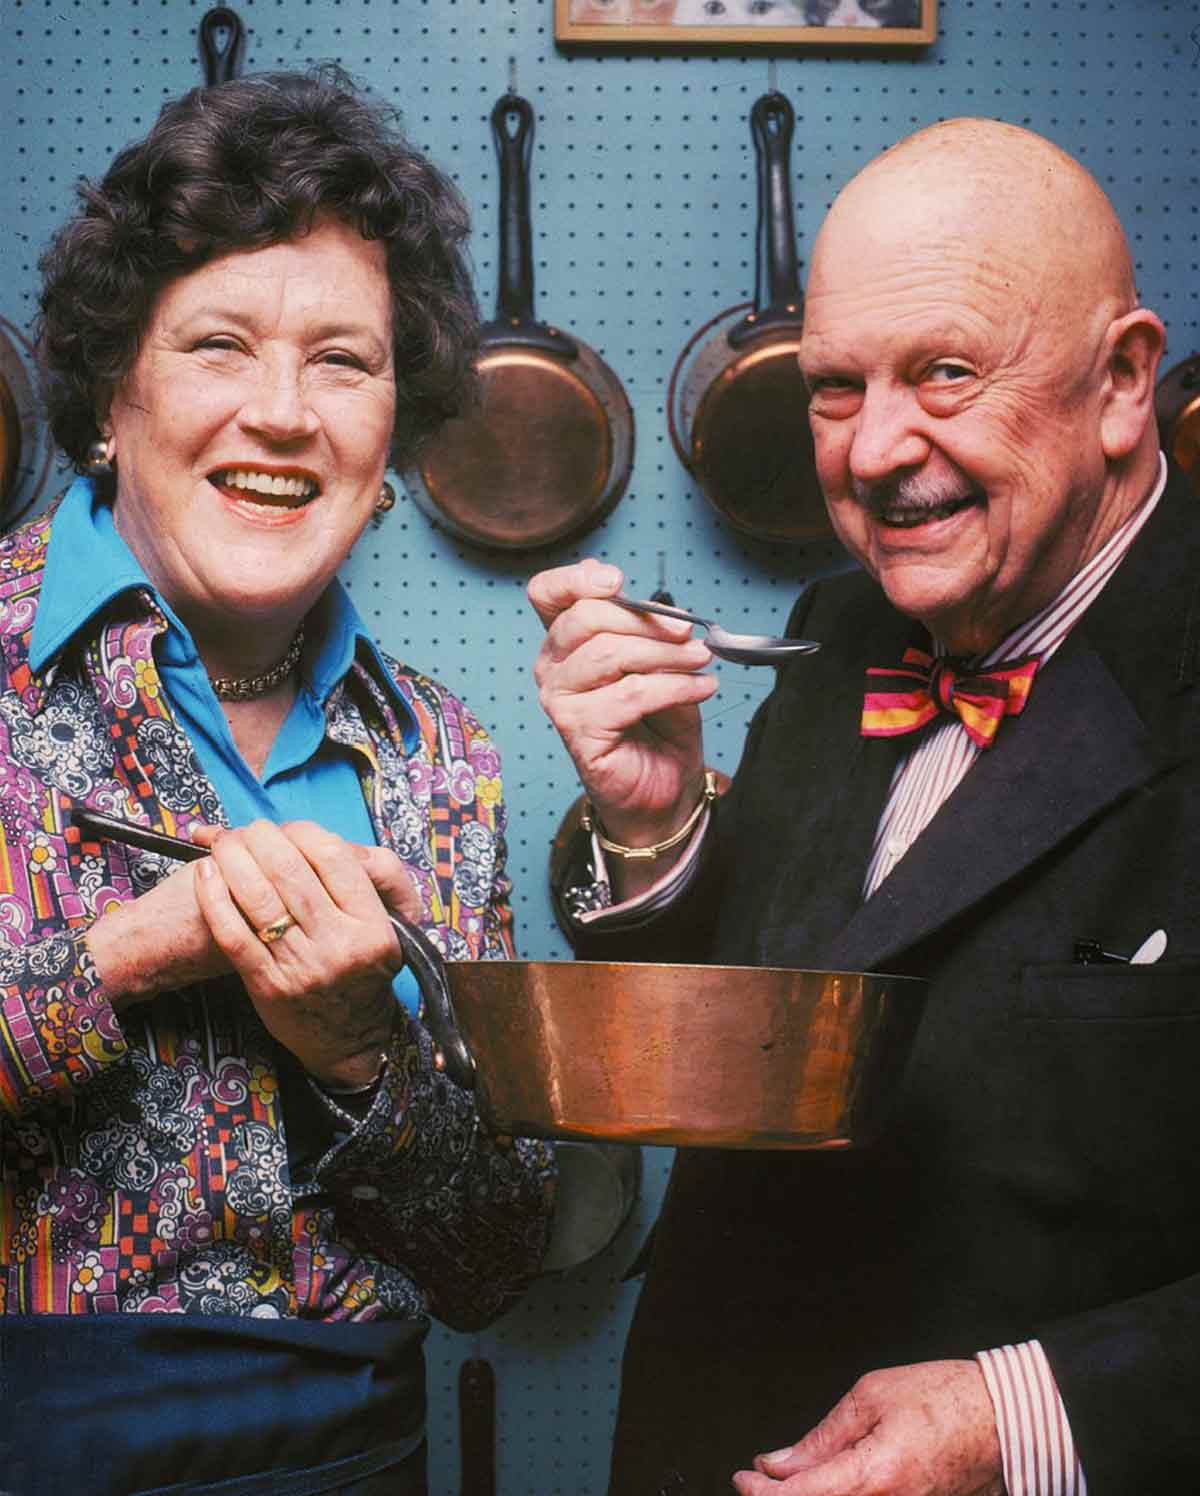 A photo of James Beard and Julia Child, featured in the podcast Talking With My Mouth Full Ep. 34: An Intimate Look at James Beard with John Birdsall.